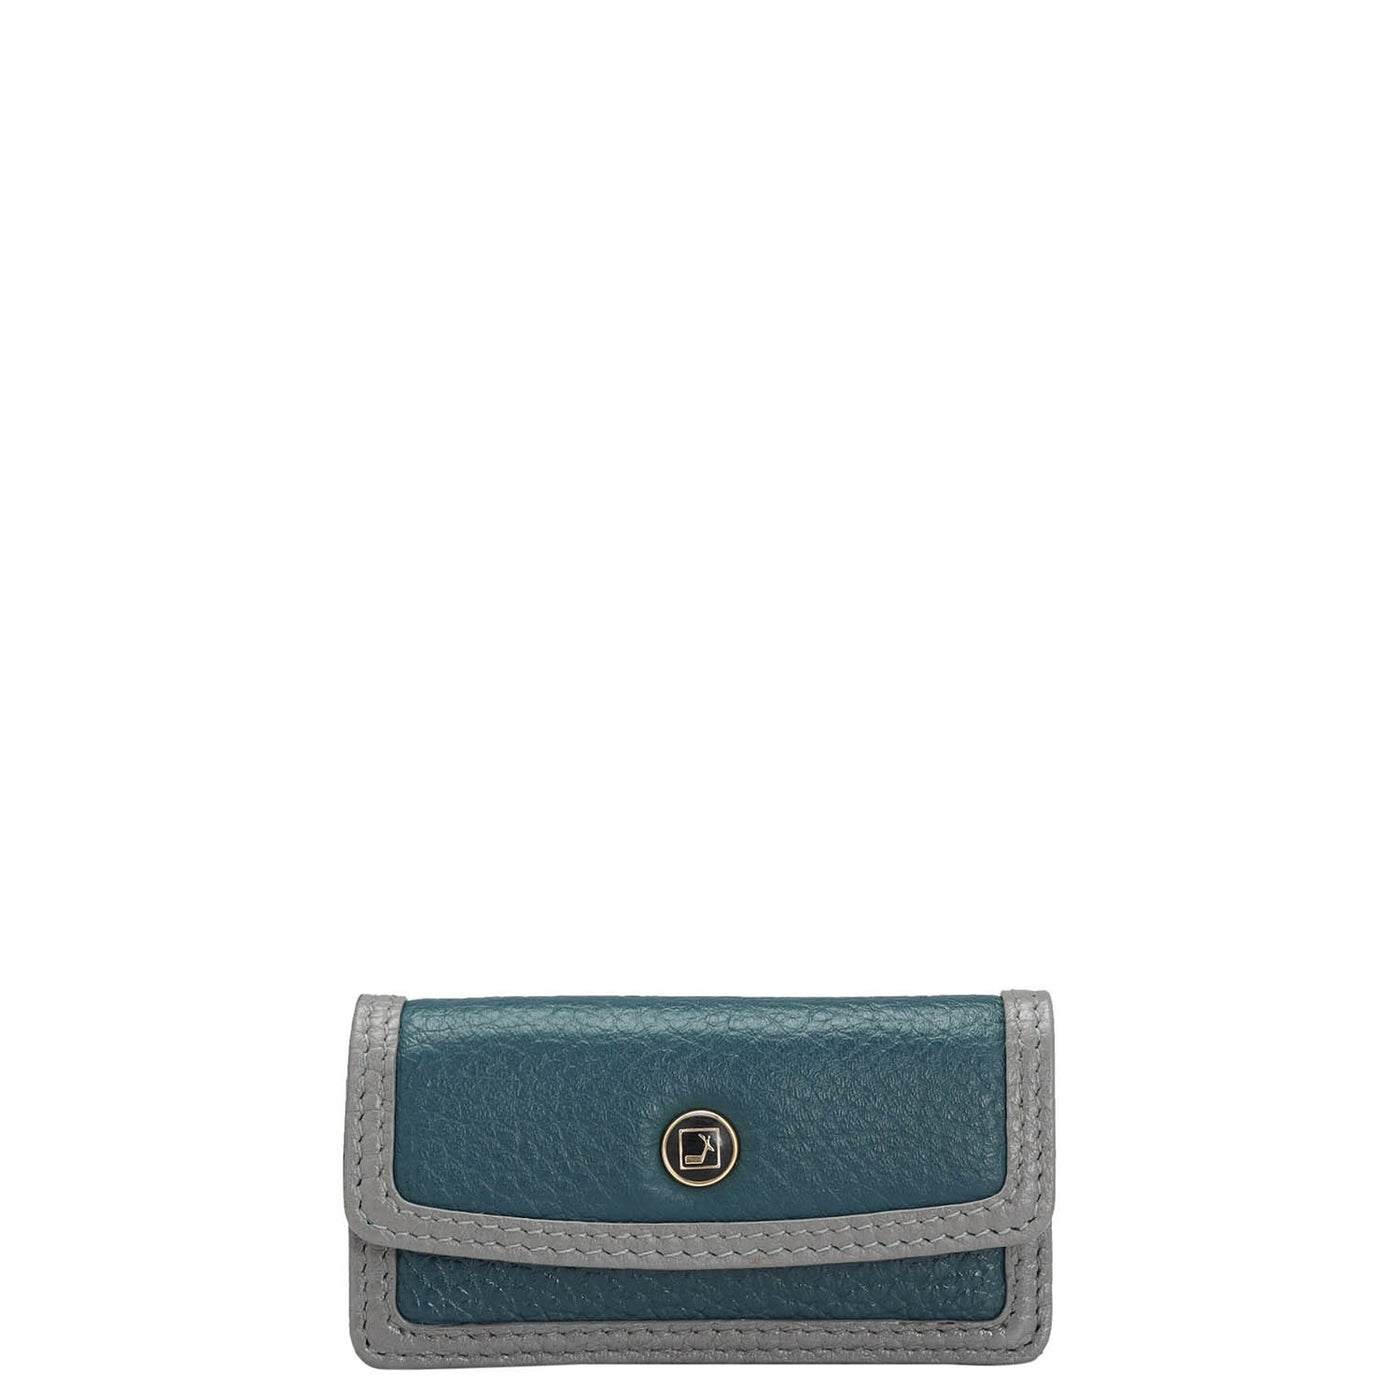 Wax Leather Lipstick Case - Teal